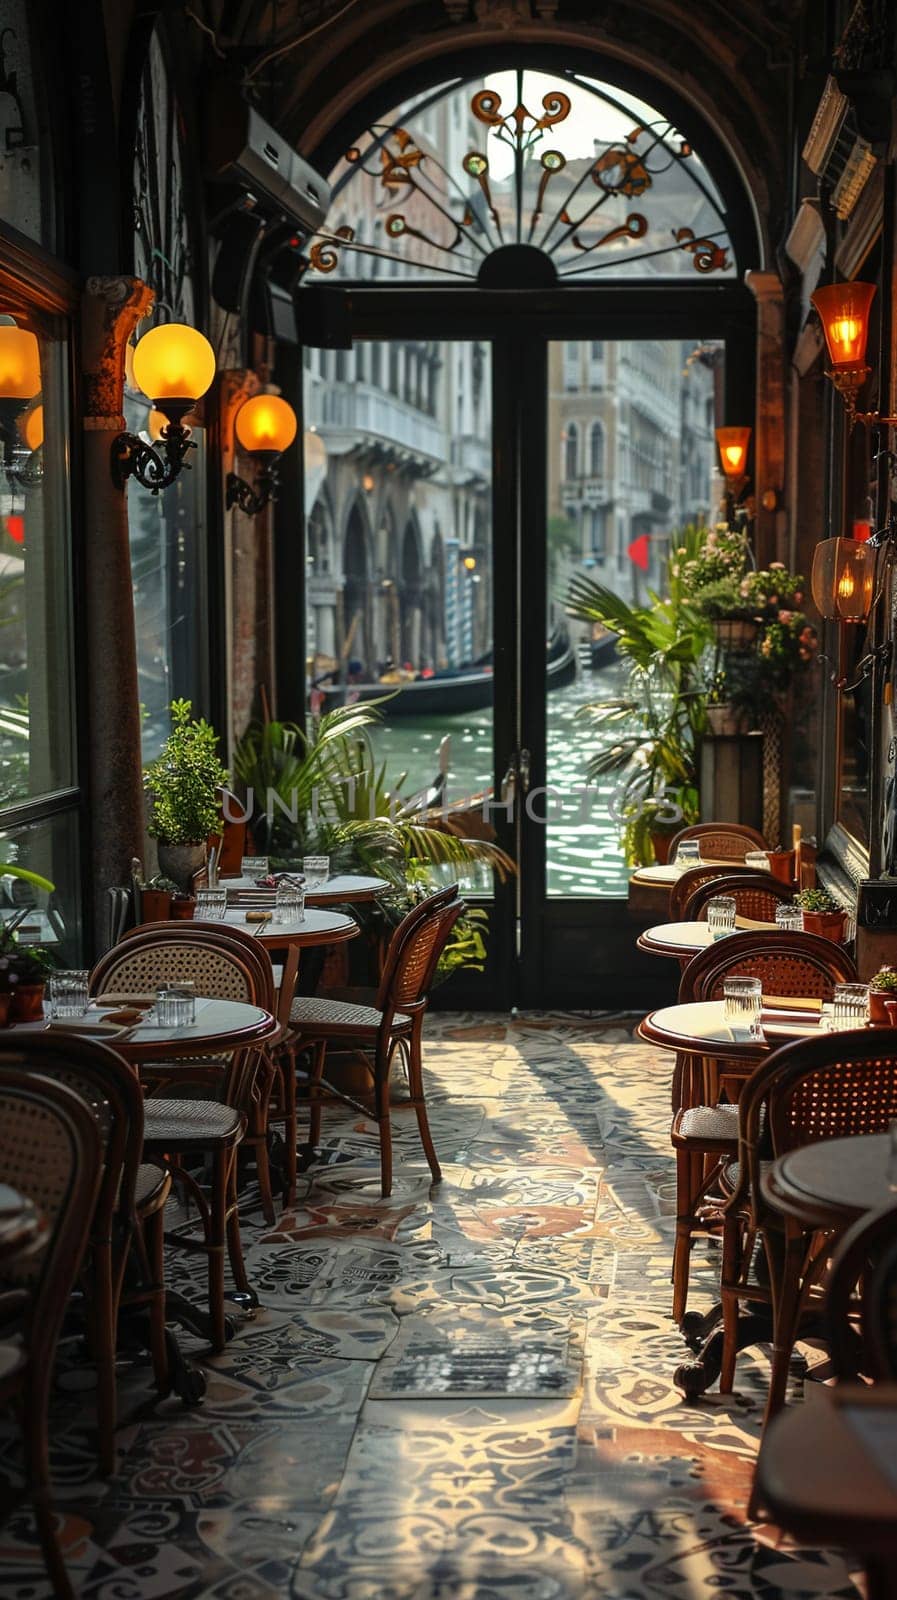 Bellini in a chic Venetian cafe, capturing the elegance and style of Italy's floating city.